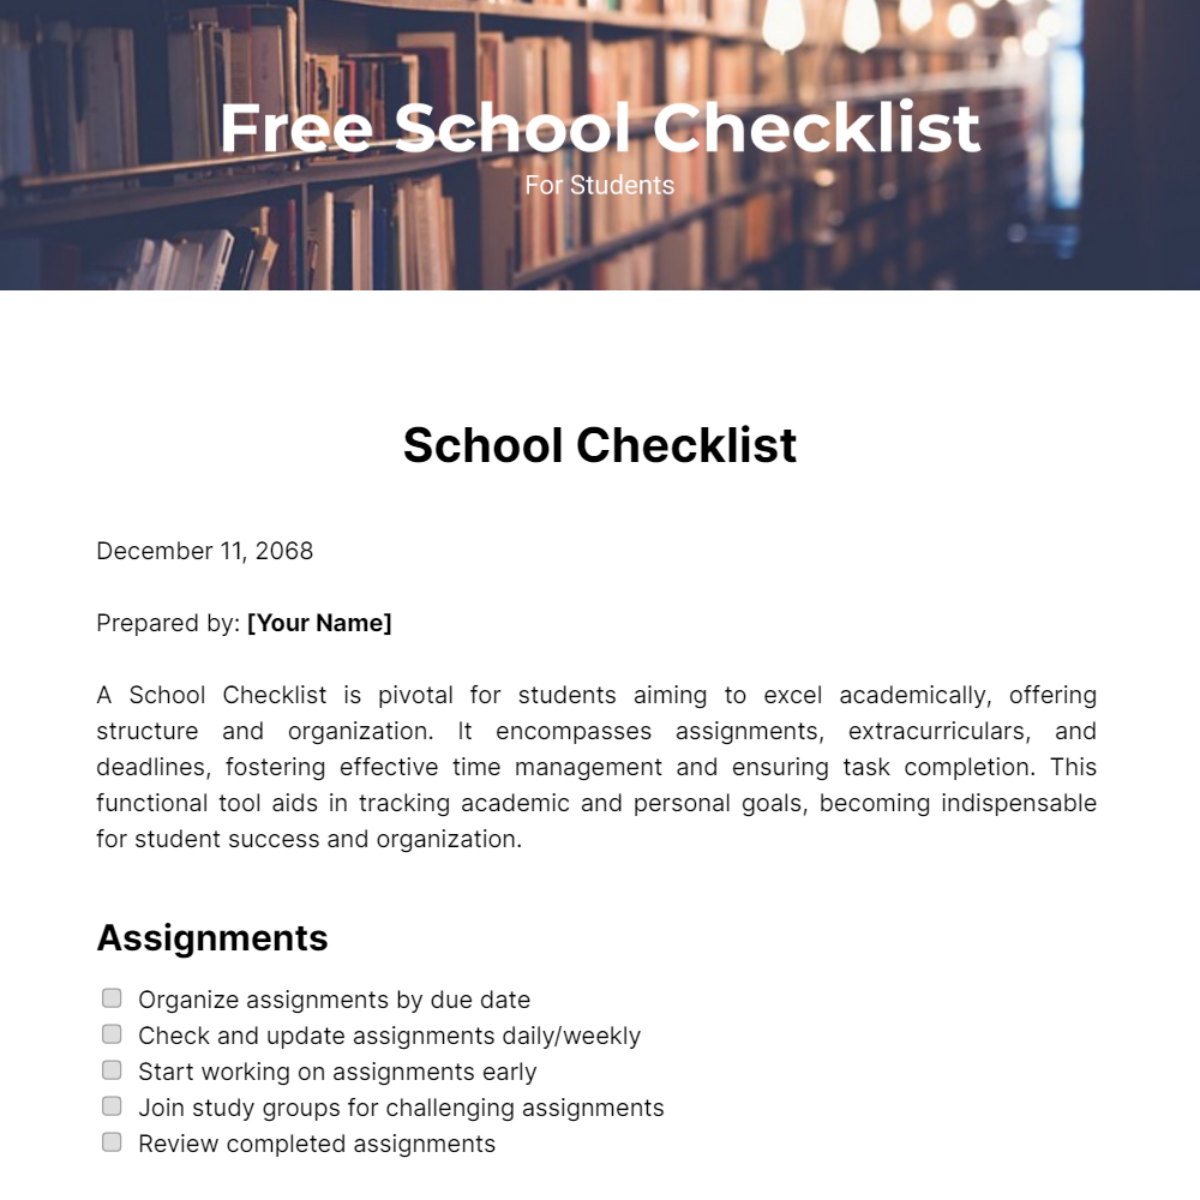 Free School Checklist for Students Template